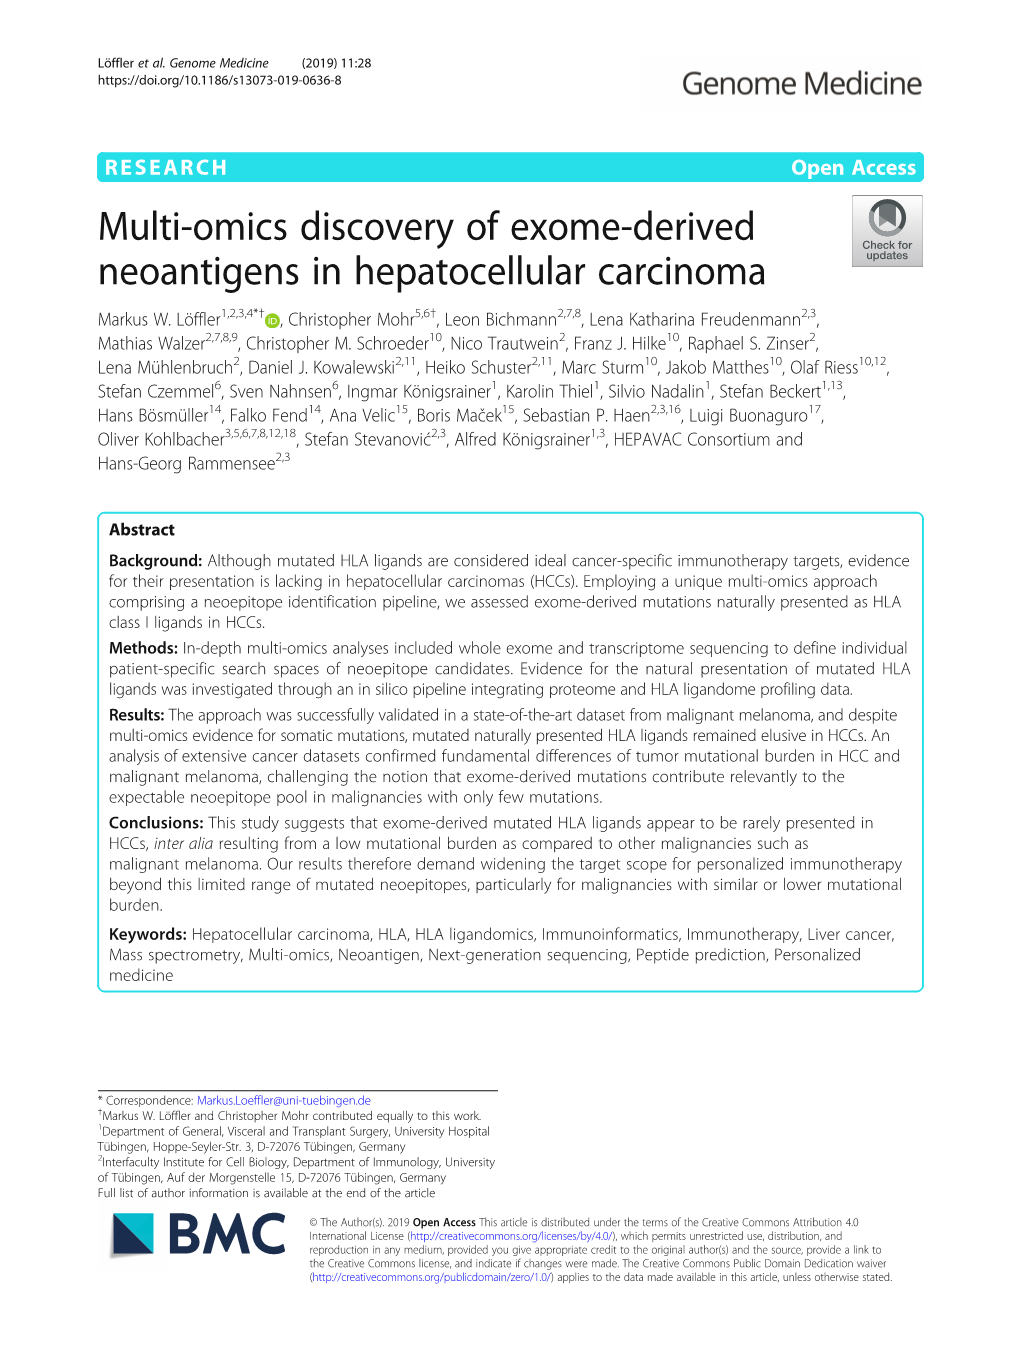 Multi-Omics Discovery of Exome-Derived Neoantigens in Hepatocellular Carcinoma Markus W